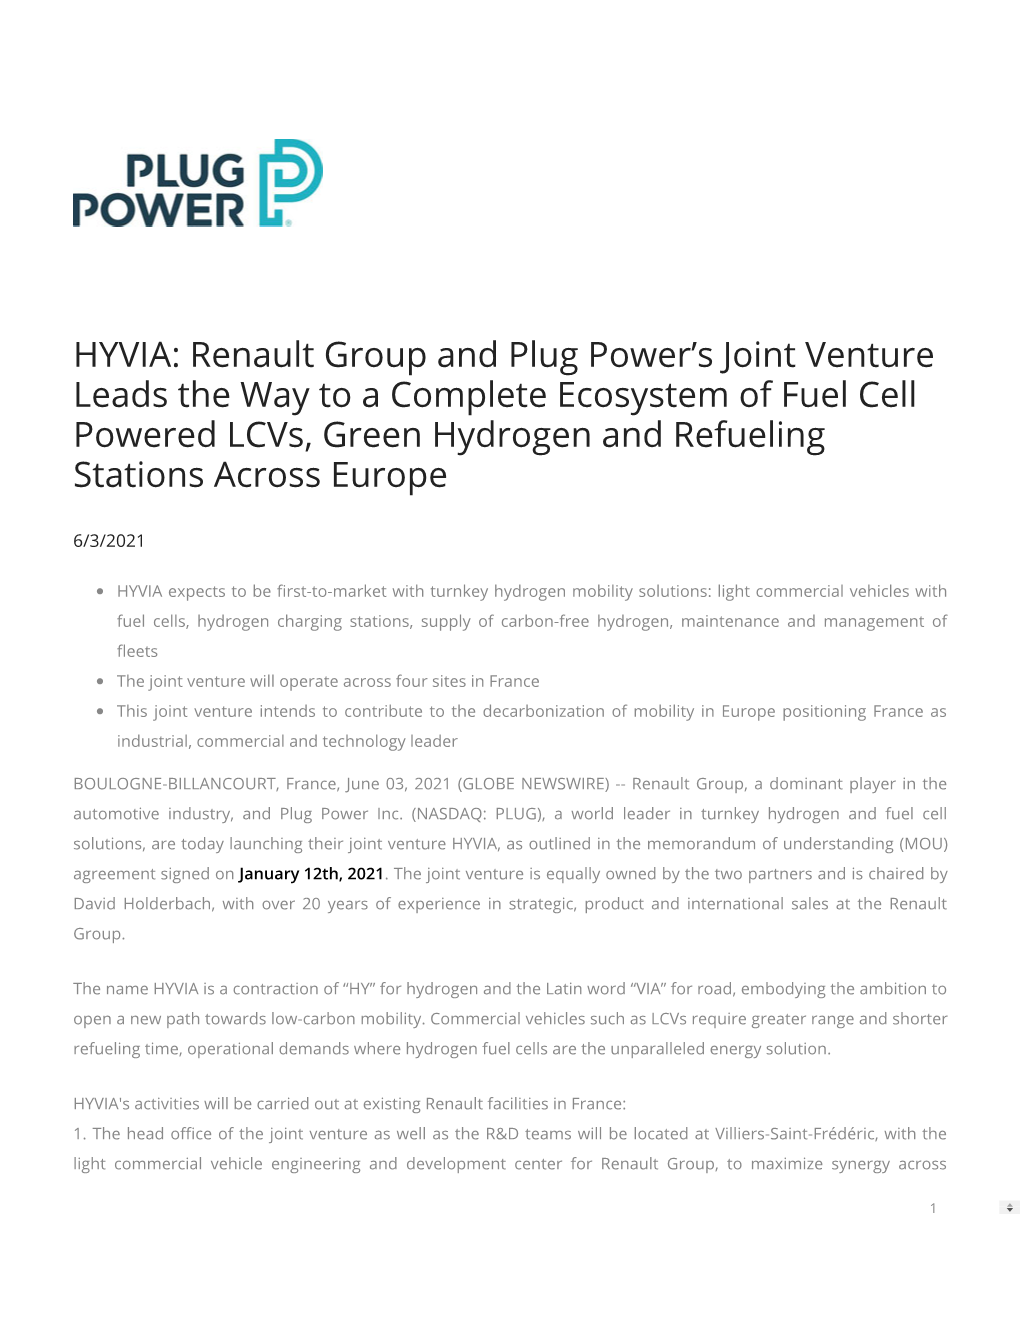 HYVIA: Renault Group and Plug Power's Joint Venture Leads The